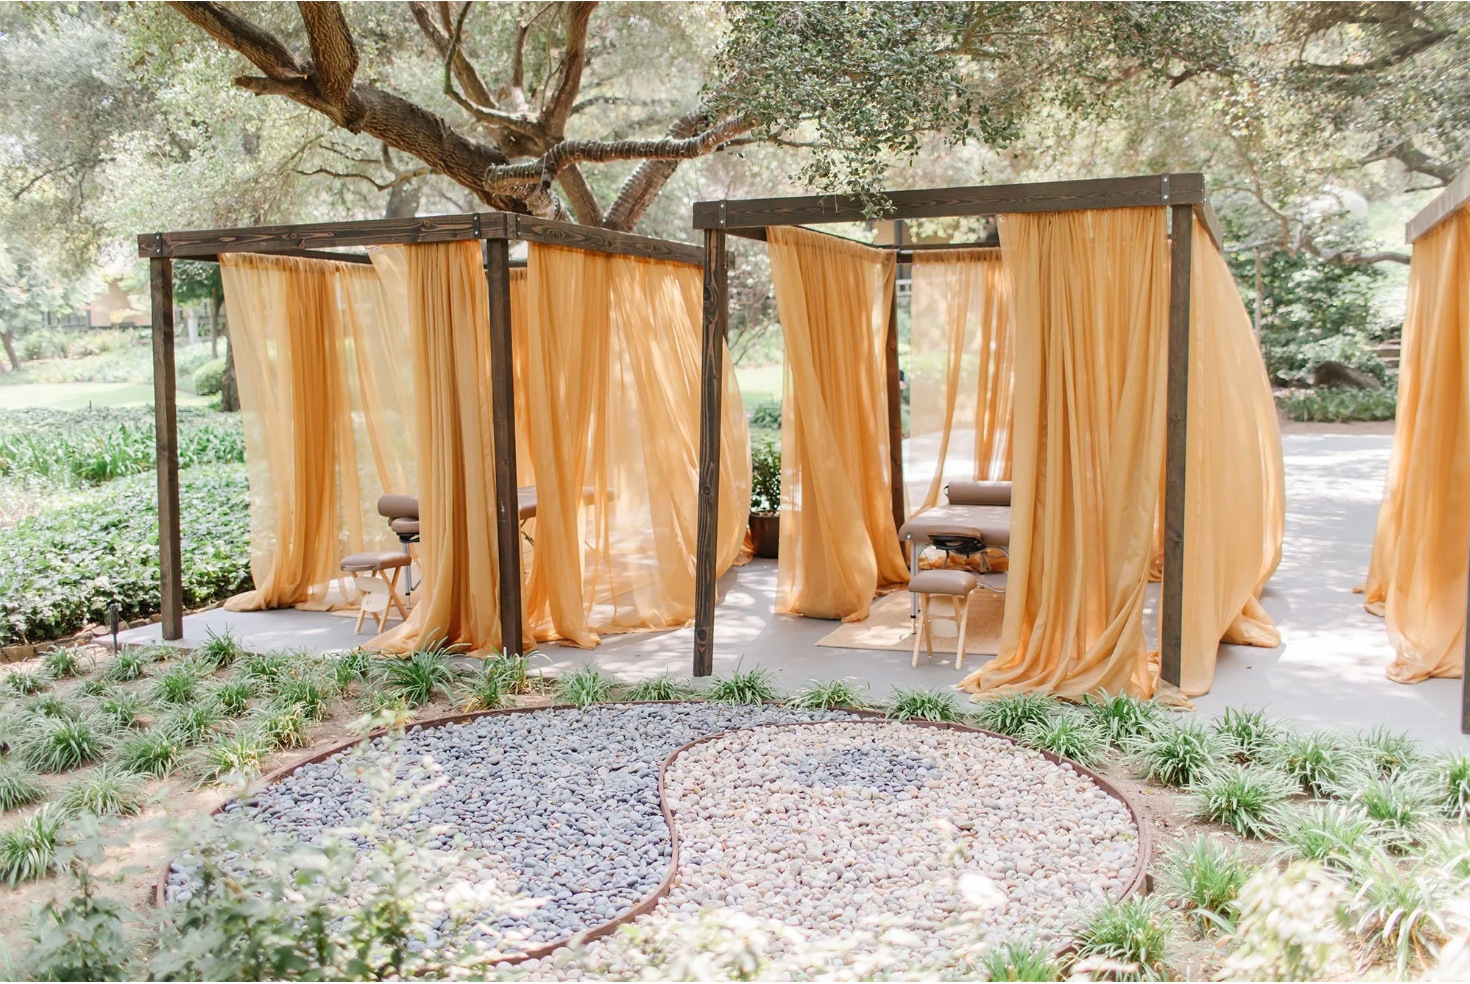 How to Set Up a Safe Outdoor Massage Space